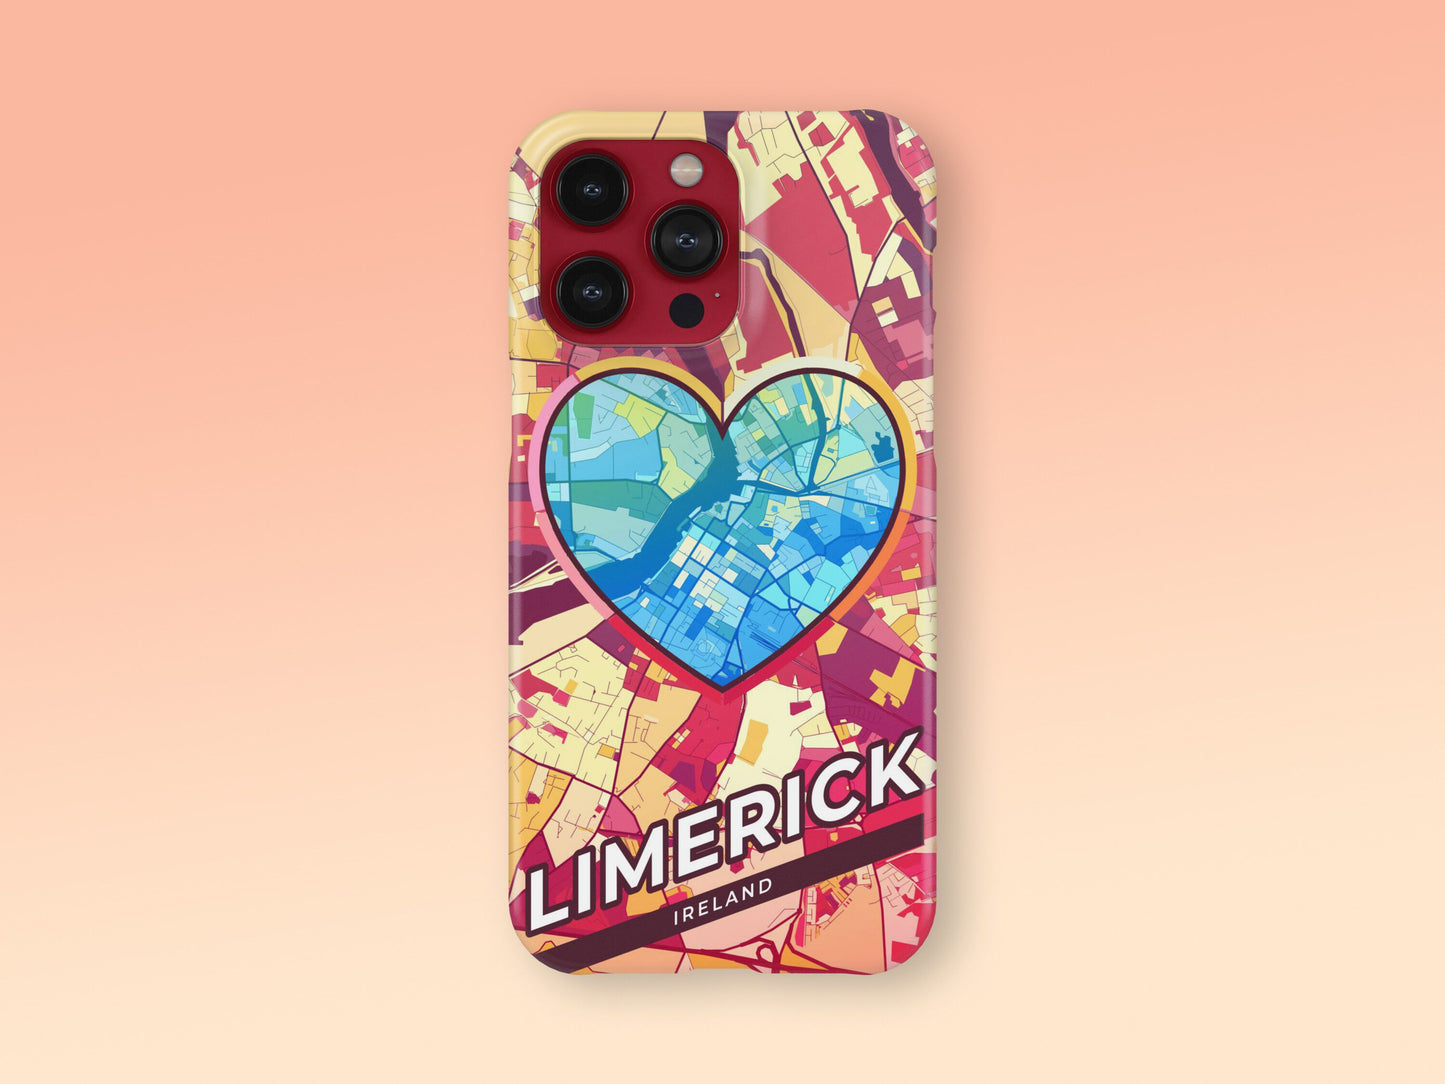 Limerick Ireland slim phone case with colorful icon. Birthday, wedding or housewarming gift. Couple match cases. 2